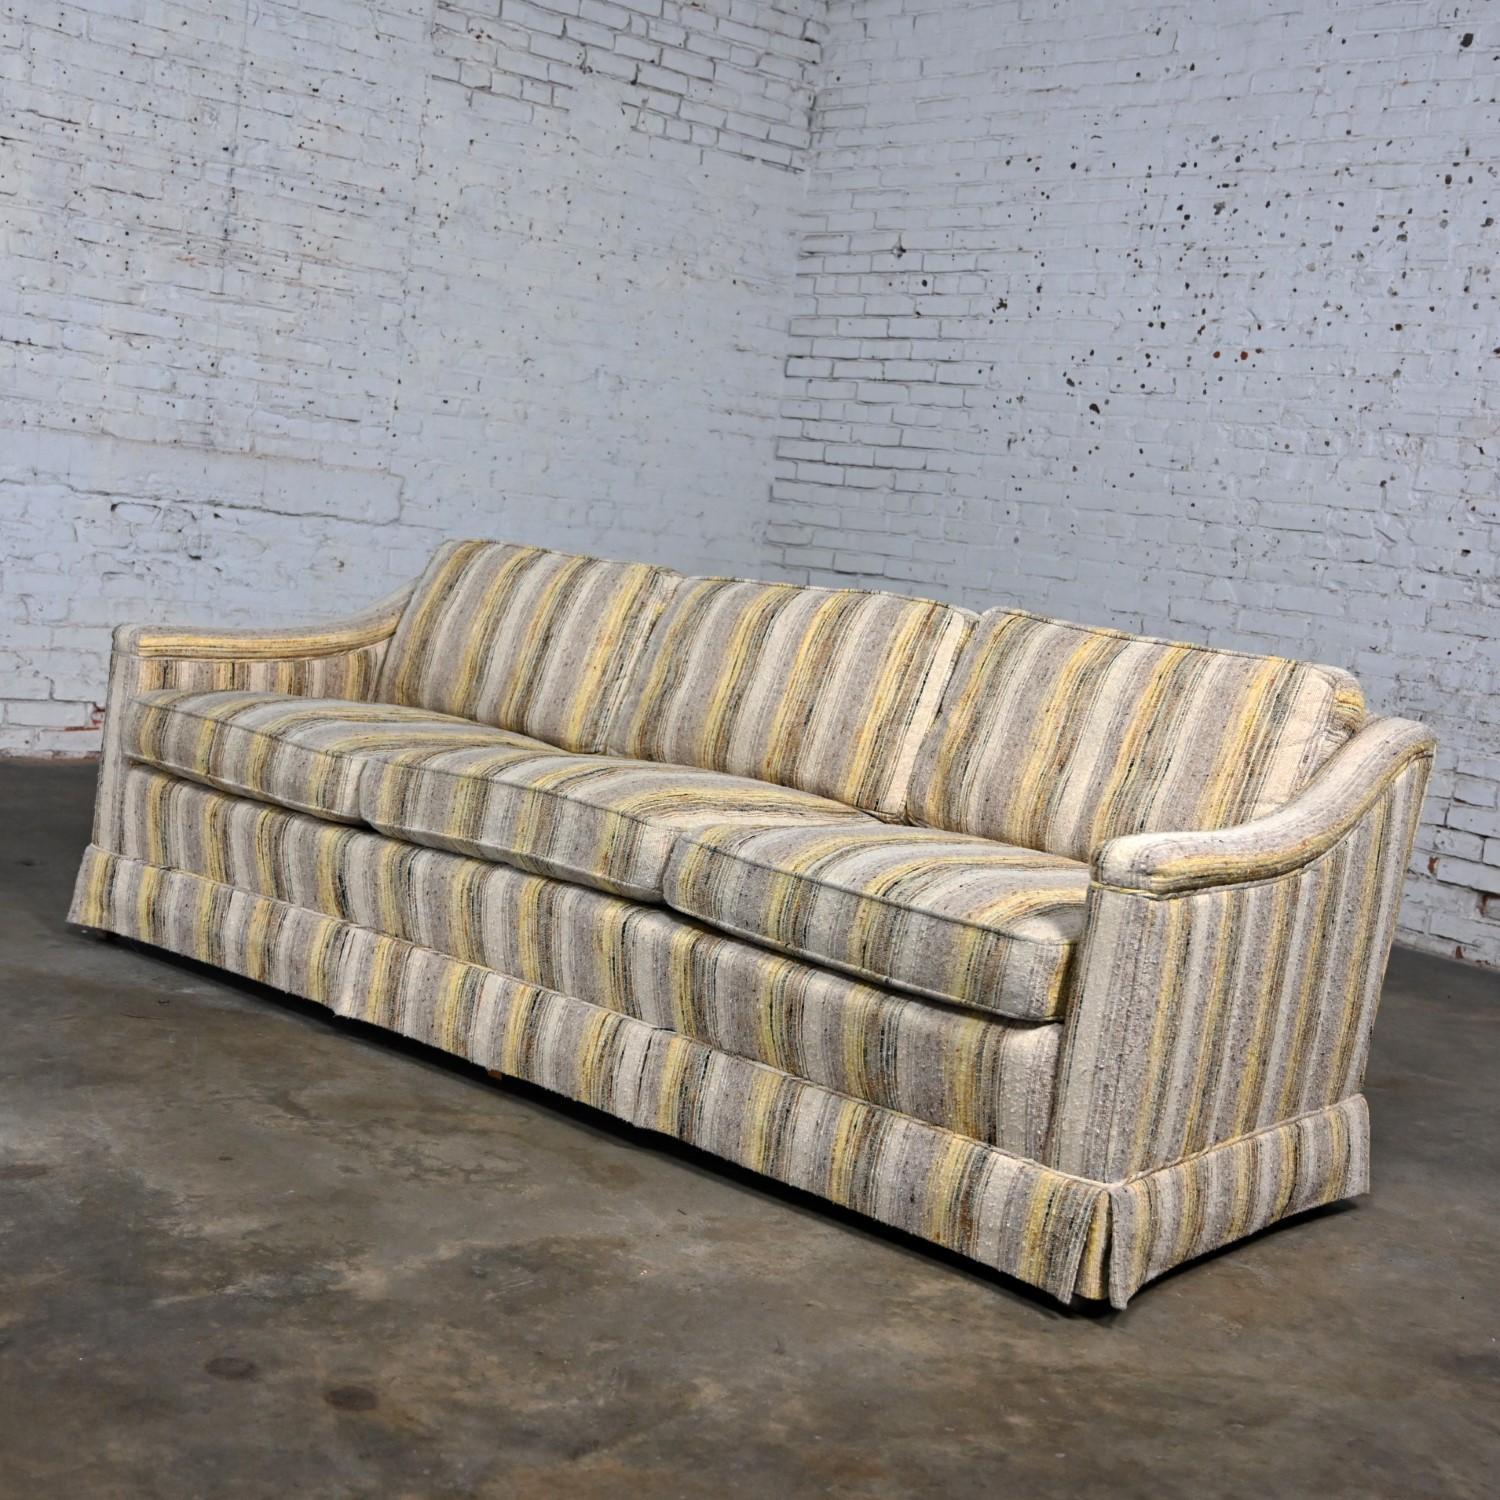 Mid-Century Modern Henredon Sofa Modified Lawson Style Yellow & Beige Striped For Sale 6